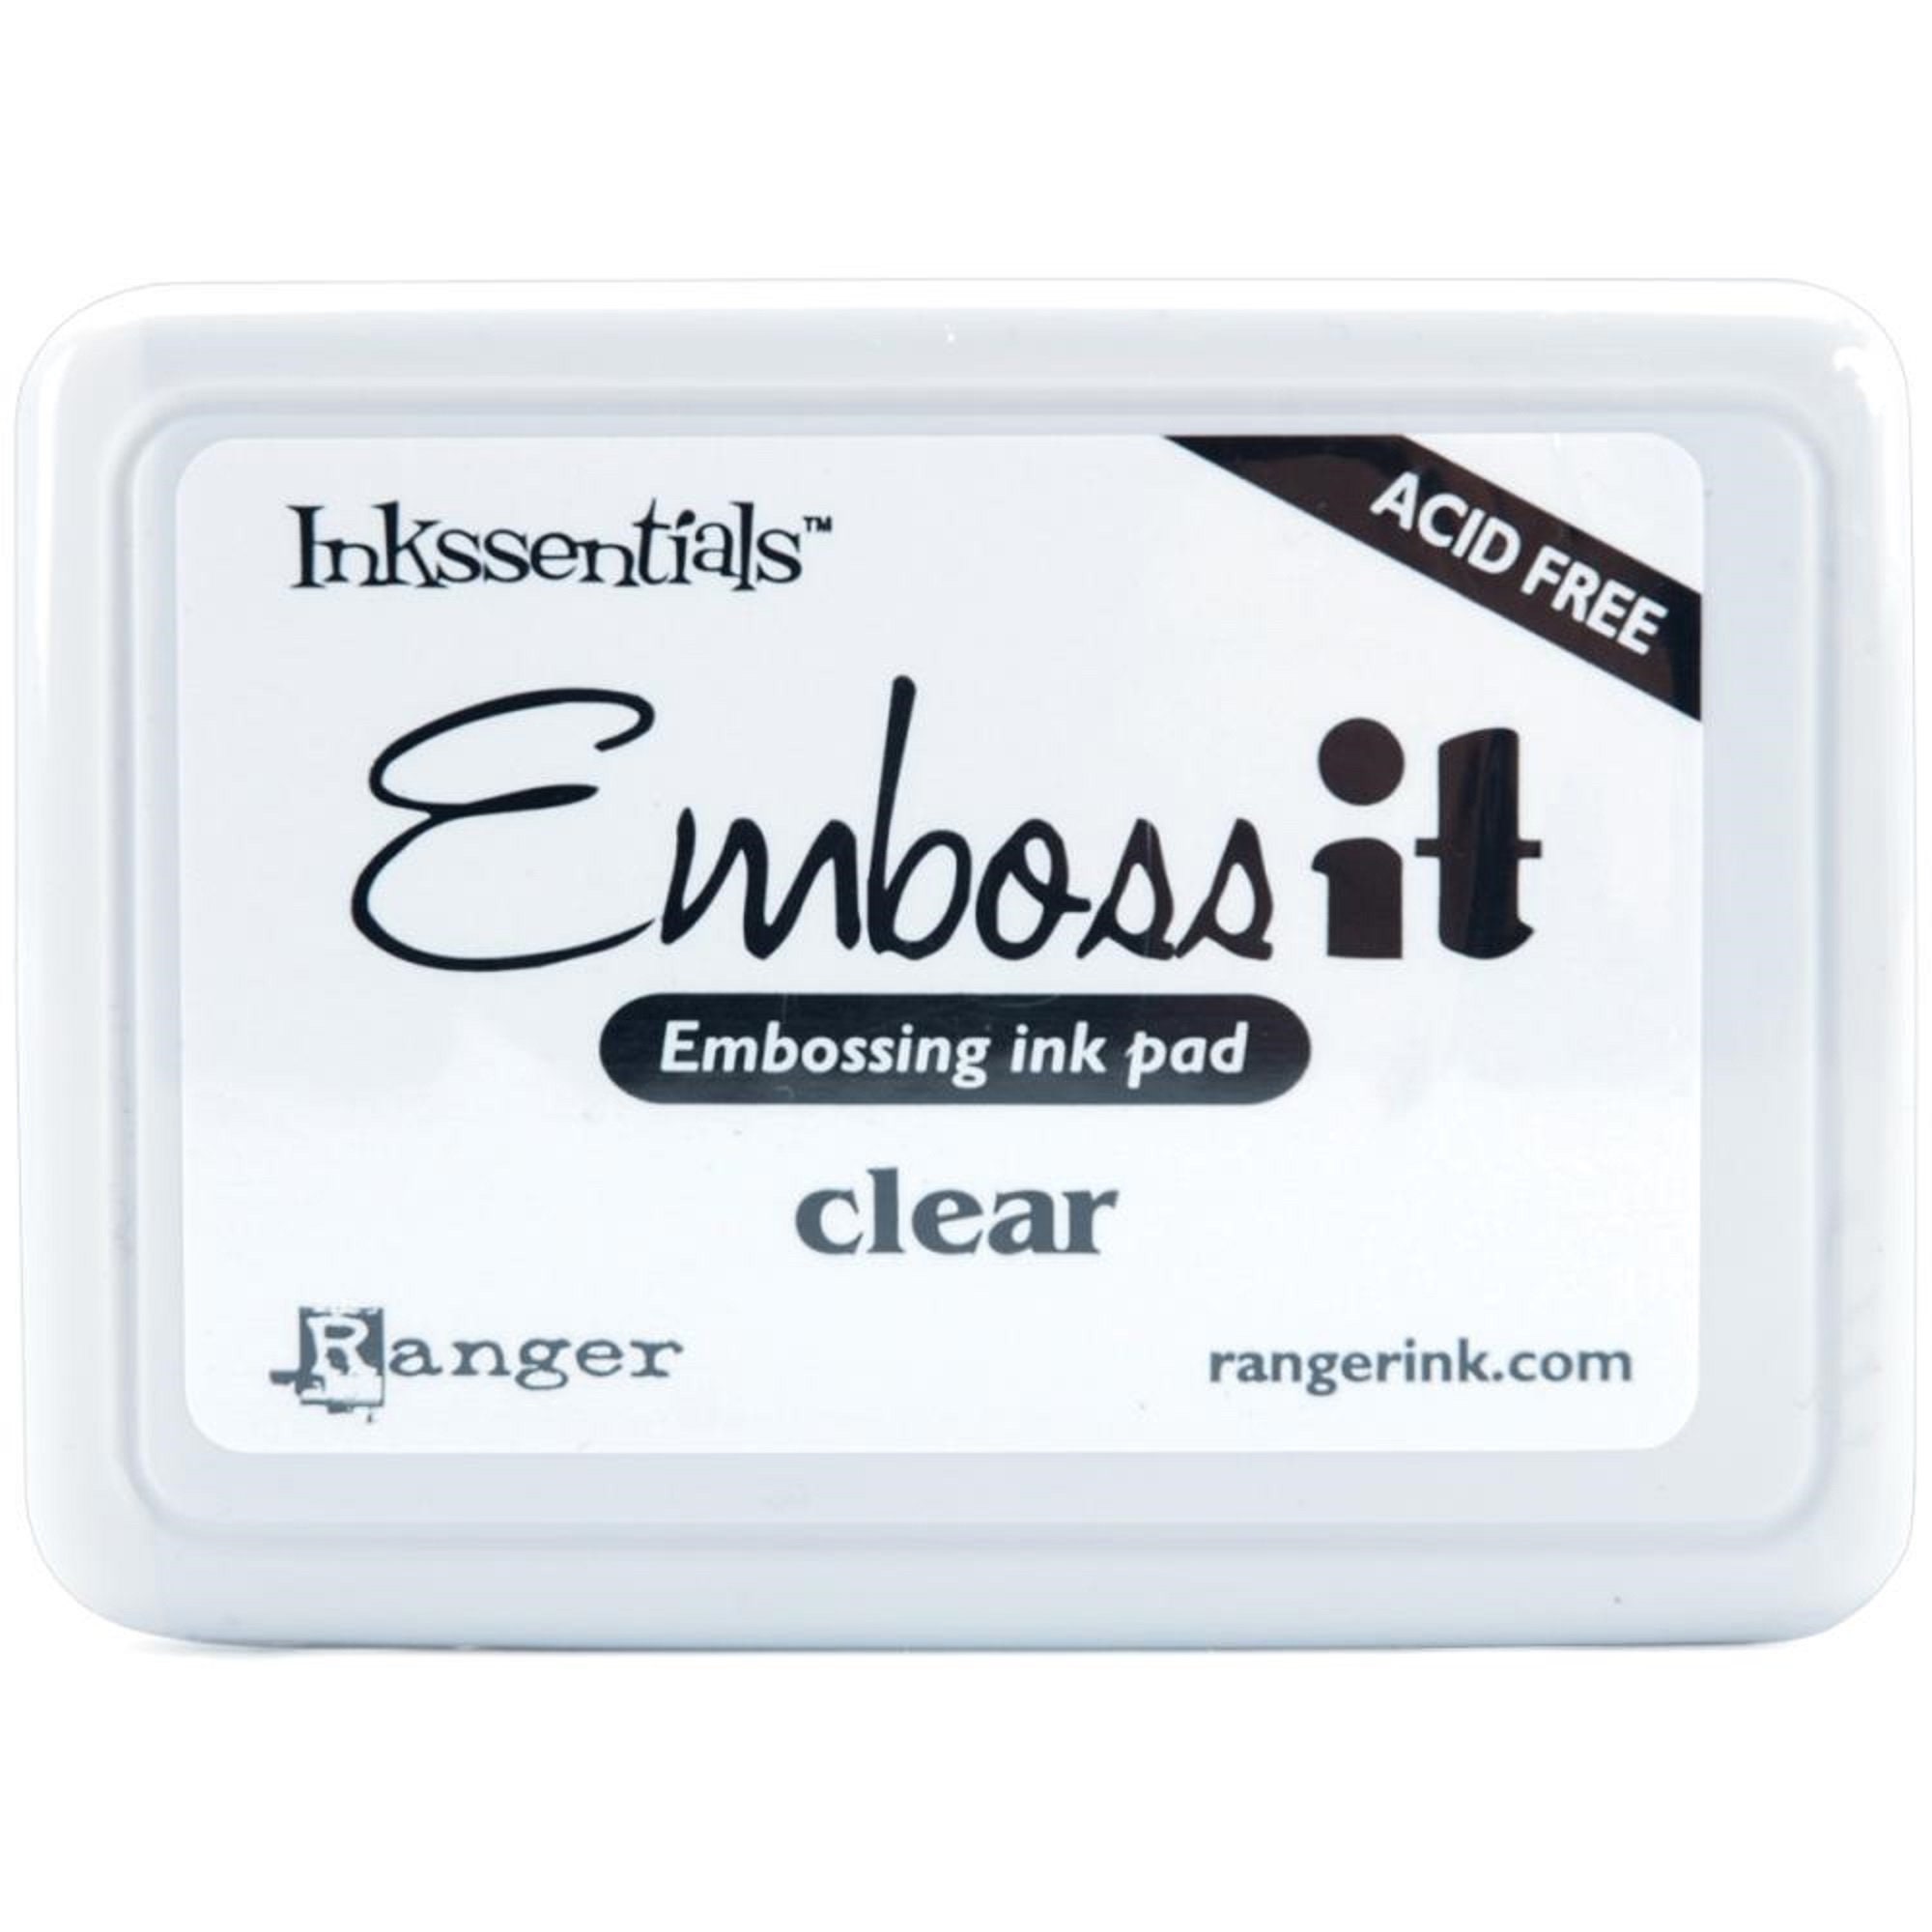 Embossing Ink Pad Clear Stamping Clear Embossing Ink Pad Ink Pen